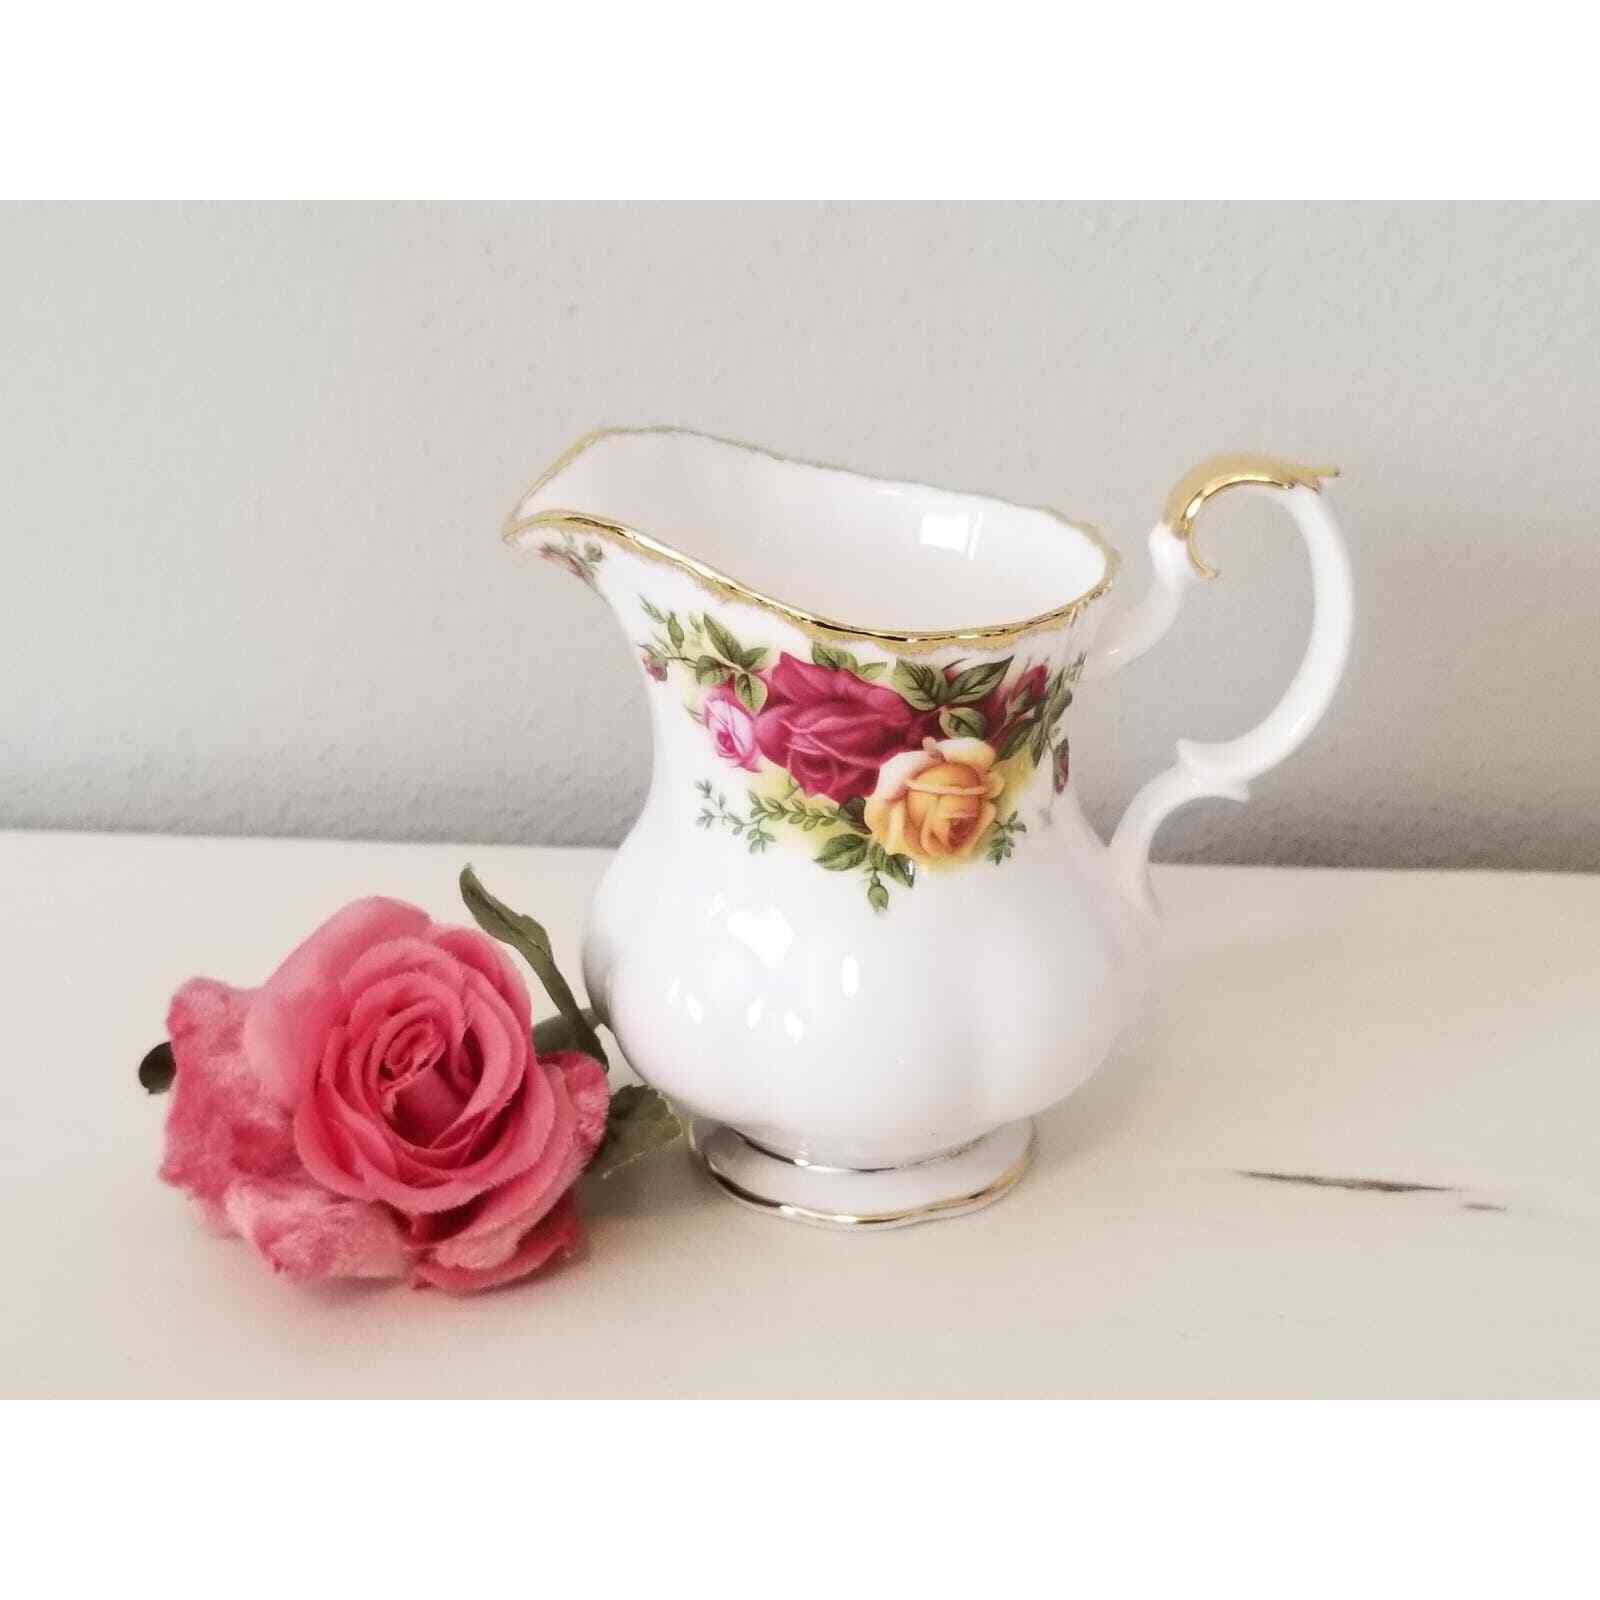 Vintage Royal Albert Old Country Roses Creamer * Made in England * New